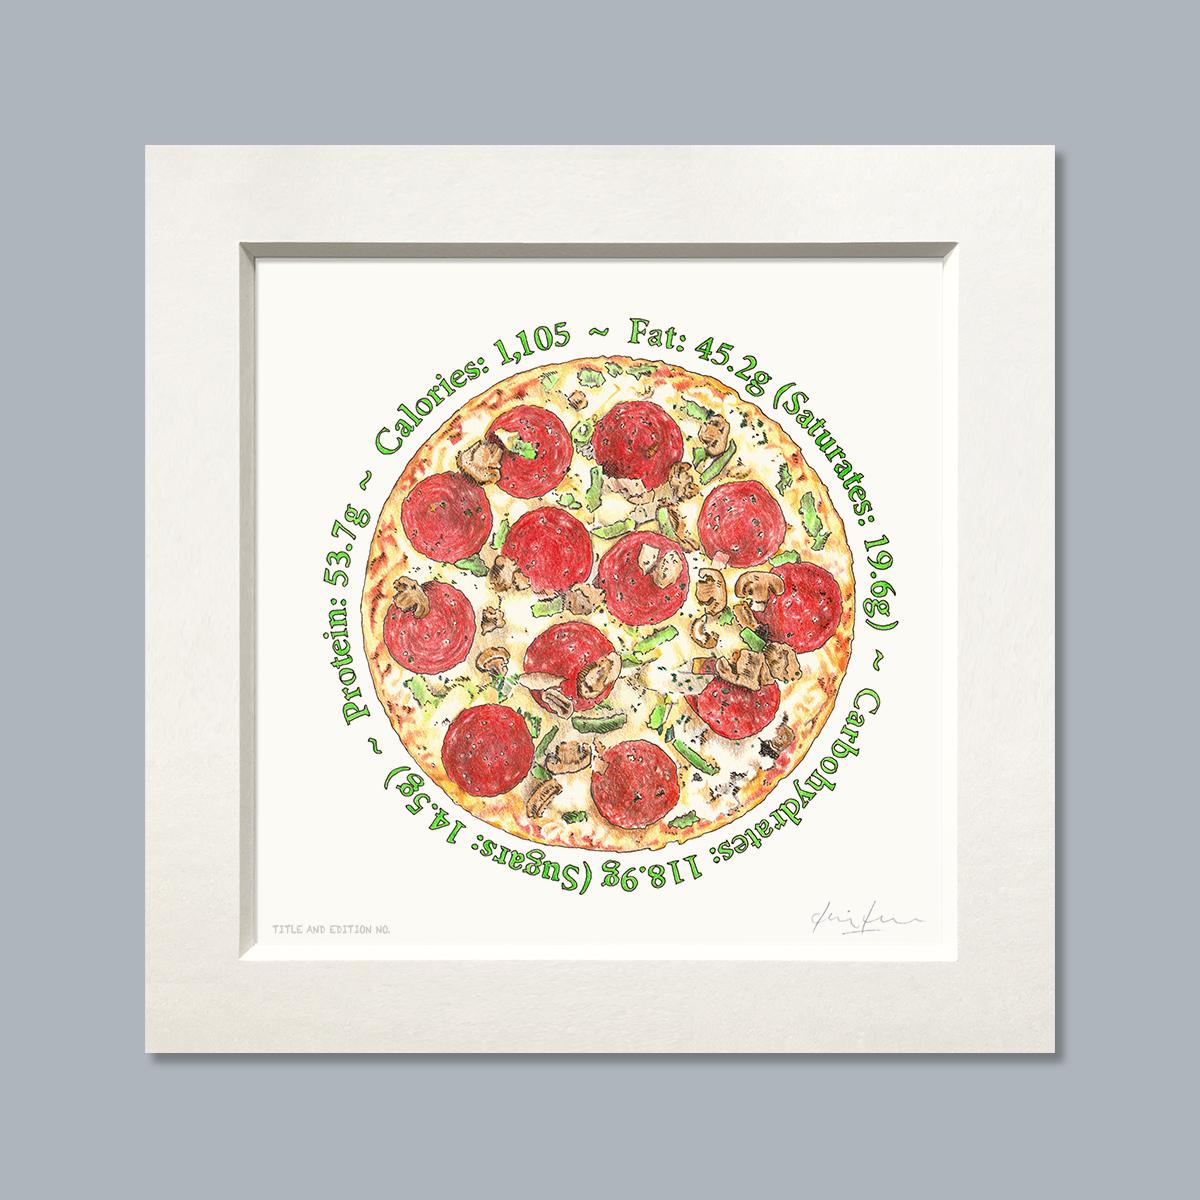 Limited edition print of coloured drawing of pizza, in a white mount.